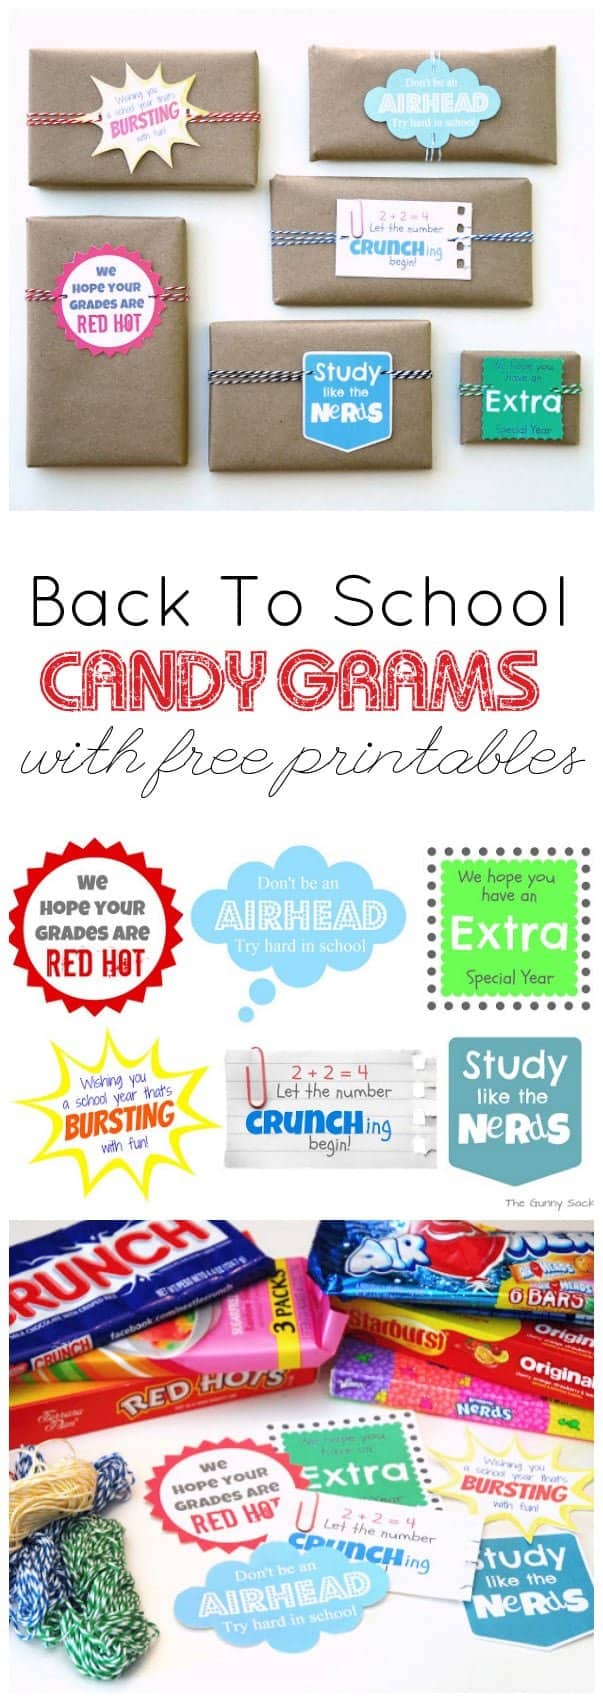 Back To School Candy Grams